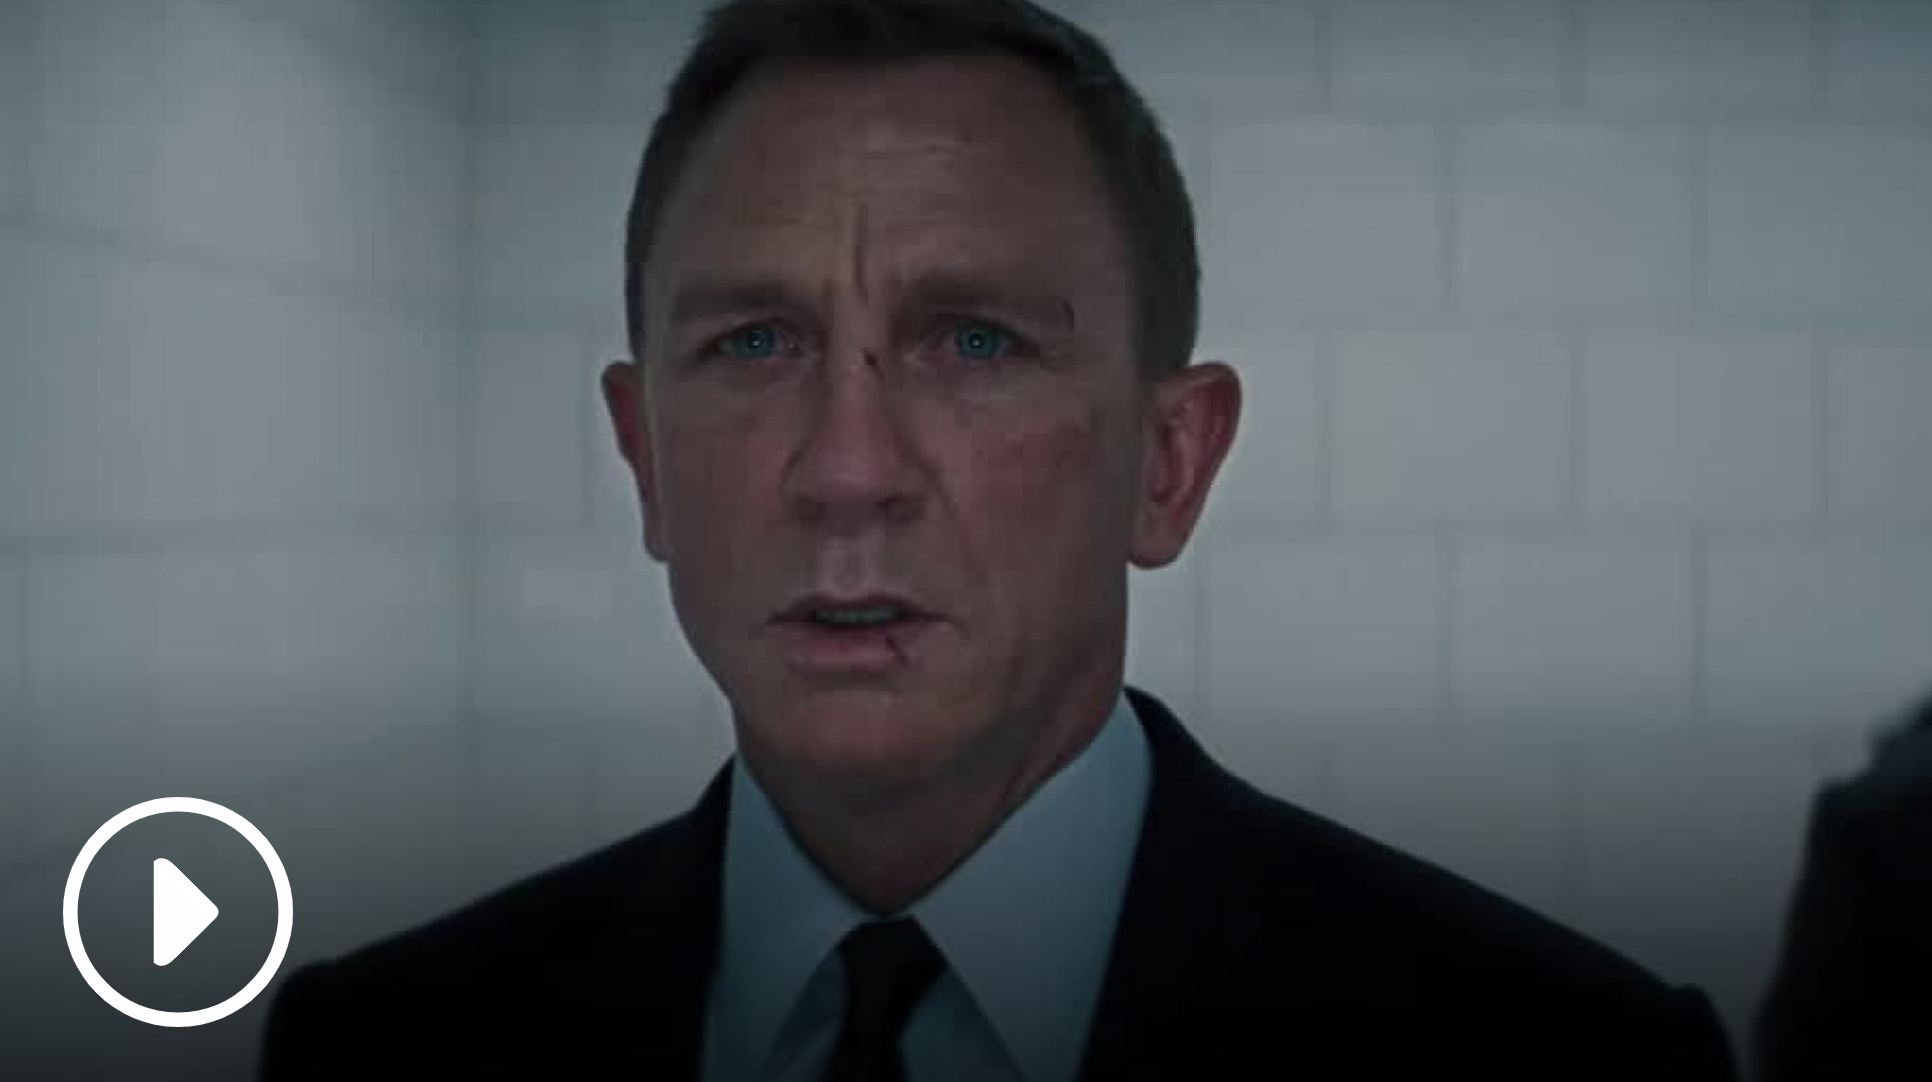 James Bond: First look at new No Time To Die trailer